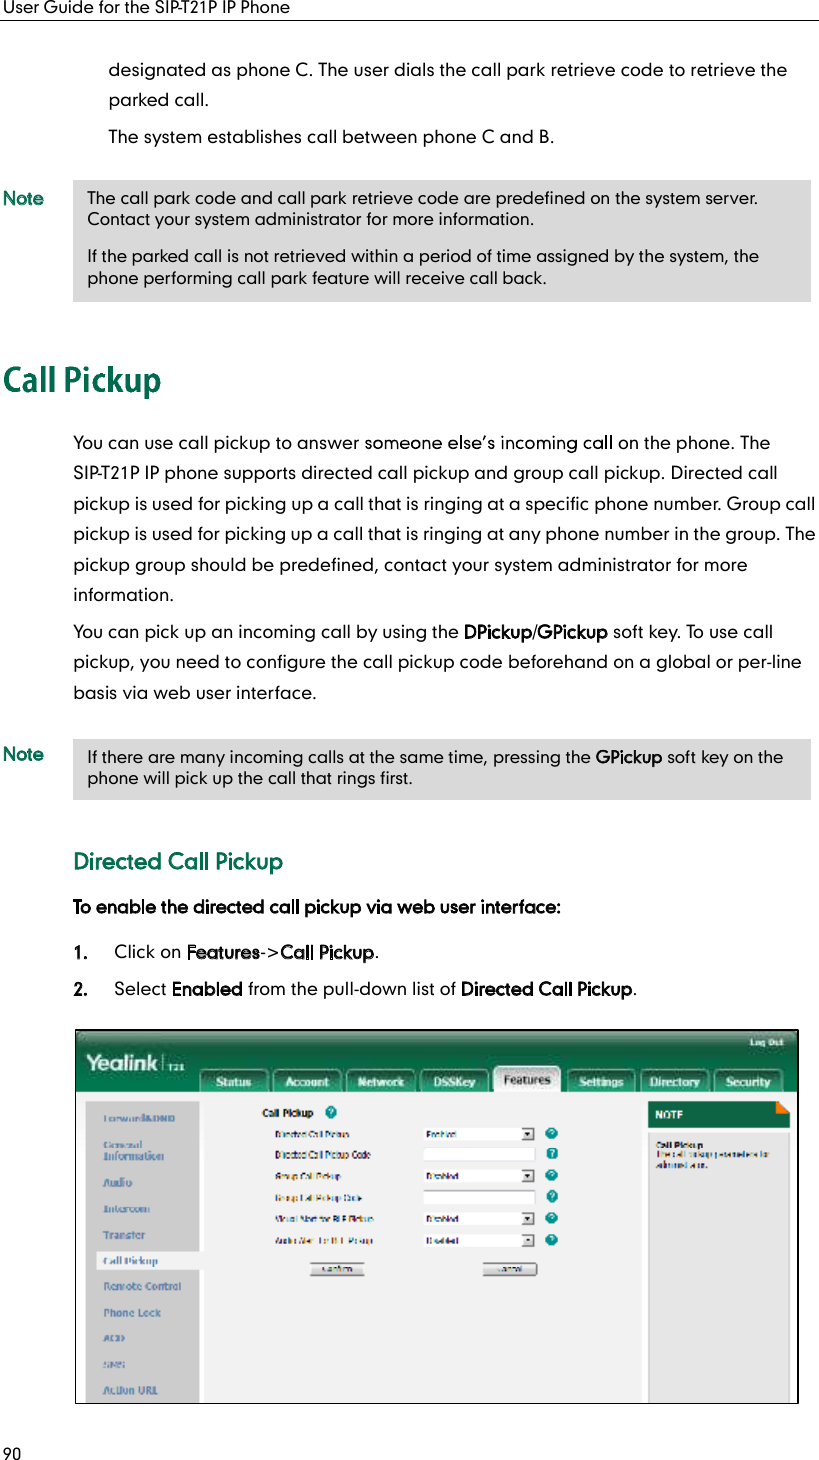 User Guide for the SIP-T21P IP Phone 90 designated as phone C. The user dials the call park retrieve code to retrieve the parked call. The system establishes call between phone C and B. Note You can use call pickup to answer   on the phone. The SIP-T21P IP phone supports directed call pickup and group call pickup. Directed call pickup is used for picking up a call that is ringing at a specific phone number. Group call pickup is used for picking up a call that is ringing at any phone number in the group. The pickup group should be predefined, contact your system administrator for more information. You can pick up an incoming call by using the DPickup/GPickup soft key. To use call pickup, you need to configure the call pickup code beforehand on a global or per-line basis via web user interface. Note Directed Call Pickup To enable the directed call pickup via web user interface: 1. Click on Features-&gt;Call Pickup. 2. Select Enabled from the pull-down list of Directed Call Pickup. The call park code and call park retrieve code are predefined on the system server. Contact your system administrator for more information. If the parked call is not retrieved within a period of time assigned by the system, the phone performing call park feature will receive call back. If there are many incoming calls at the same time, pressing the GPickup soft key on the phone will pick up the call that rings first. 